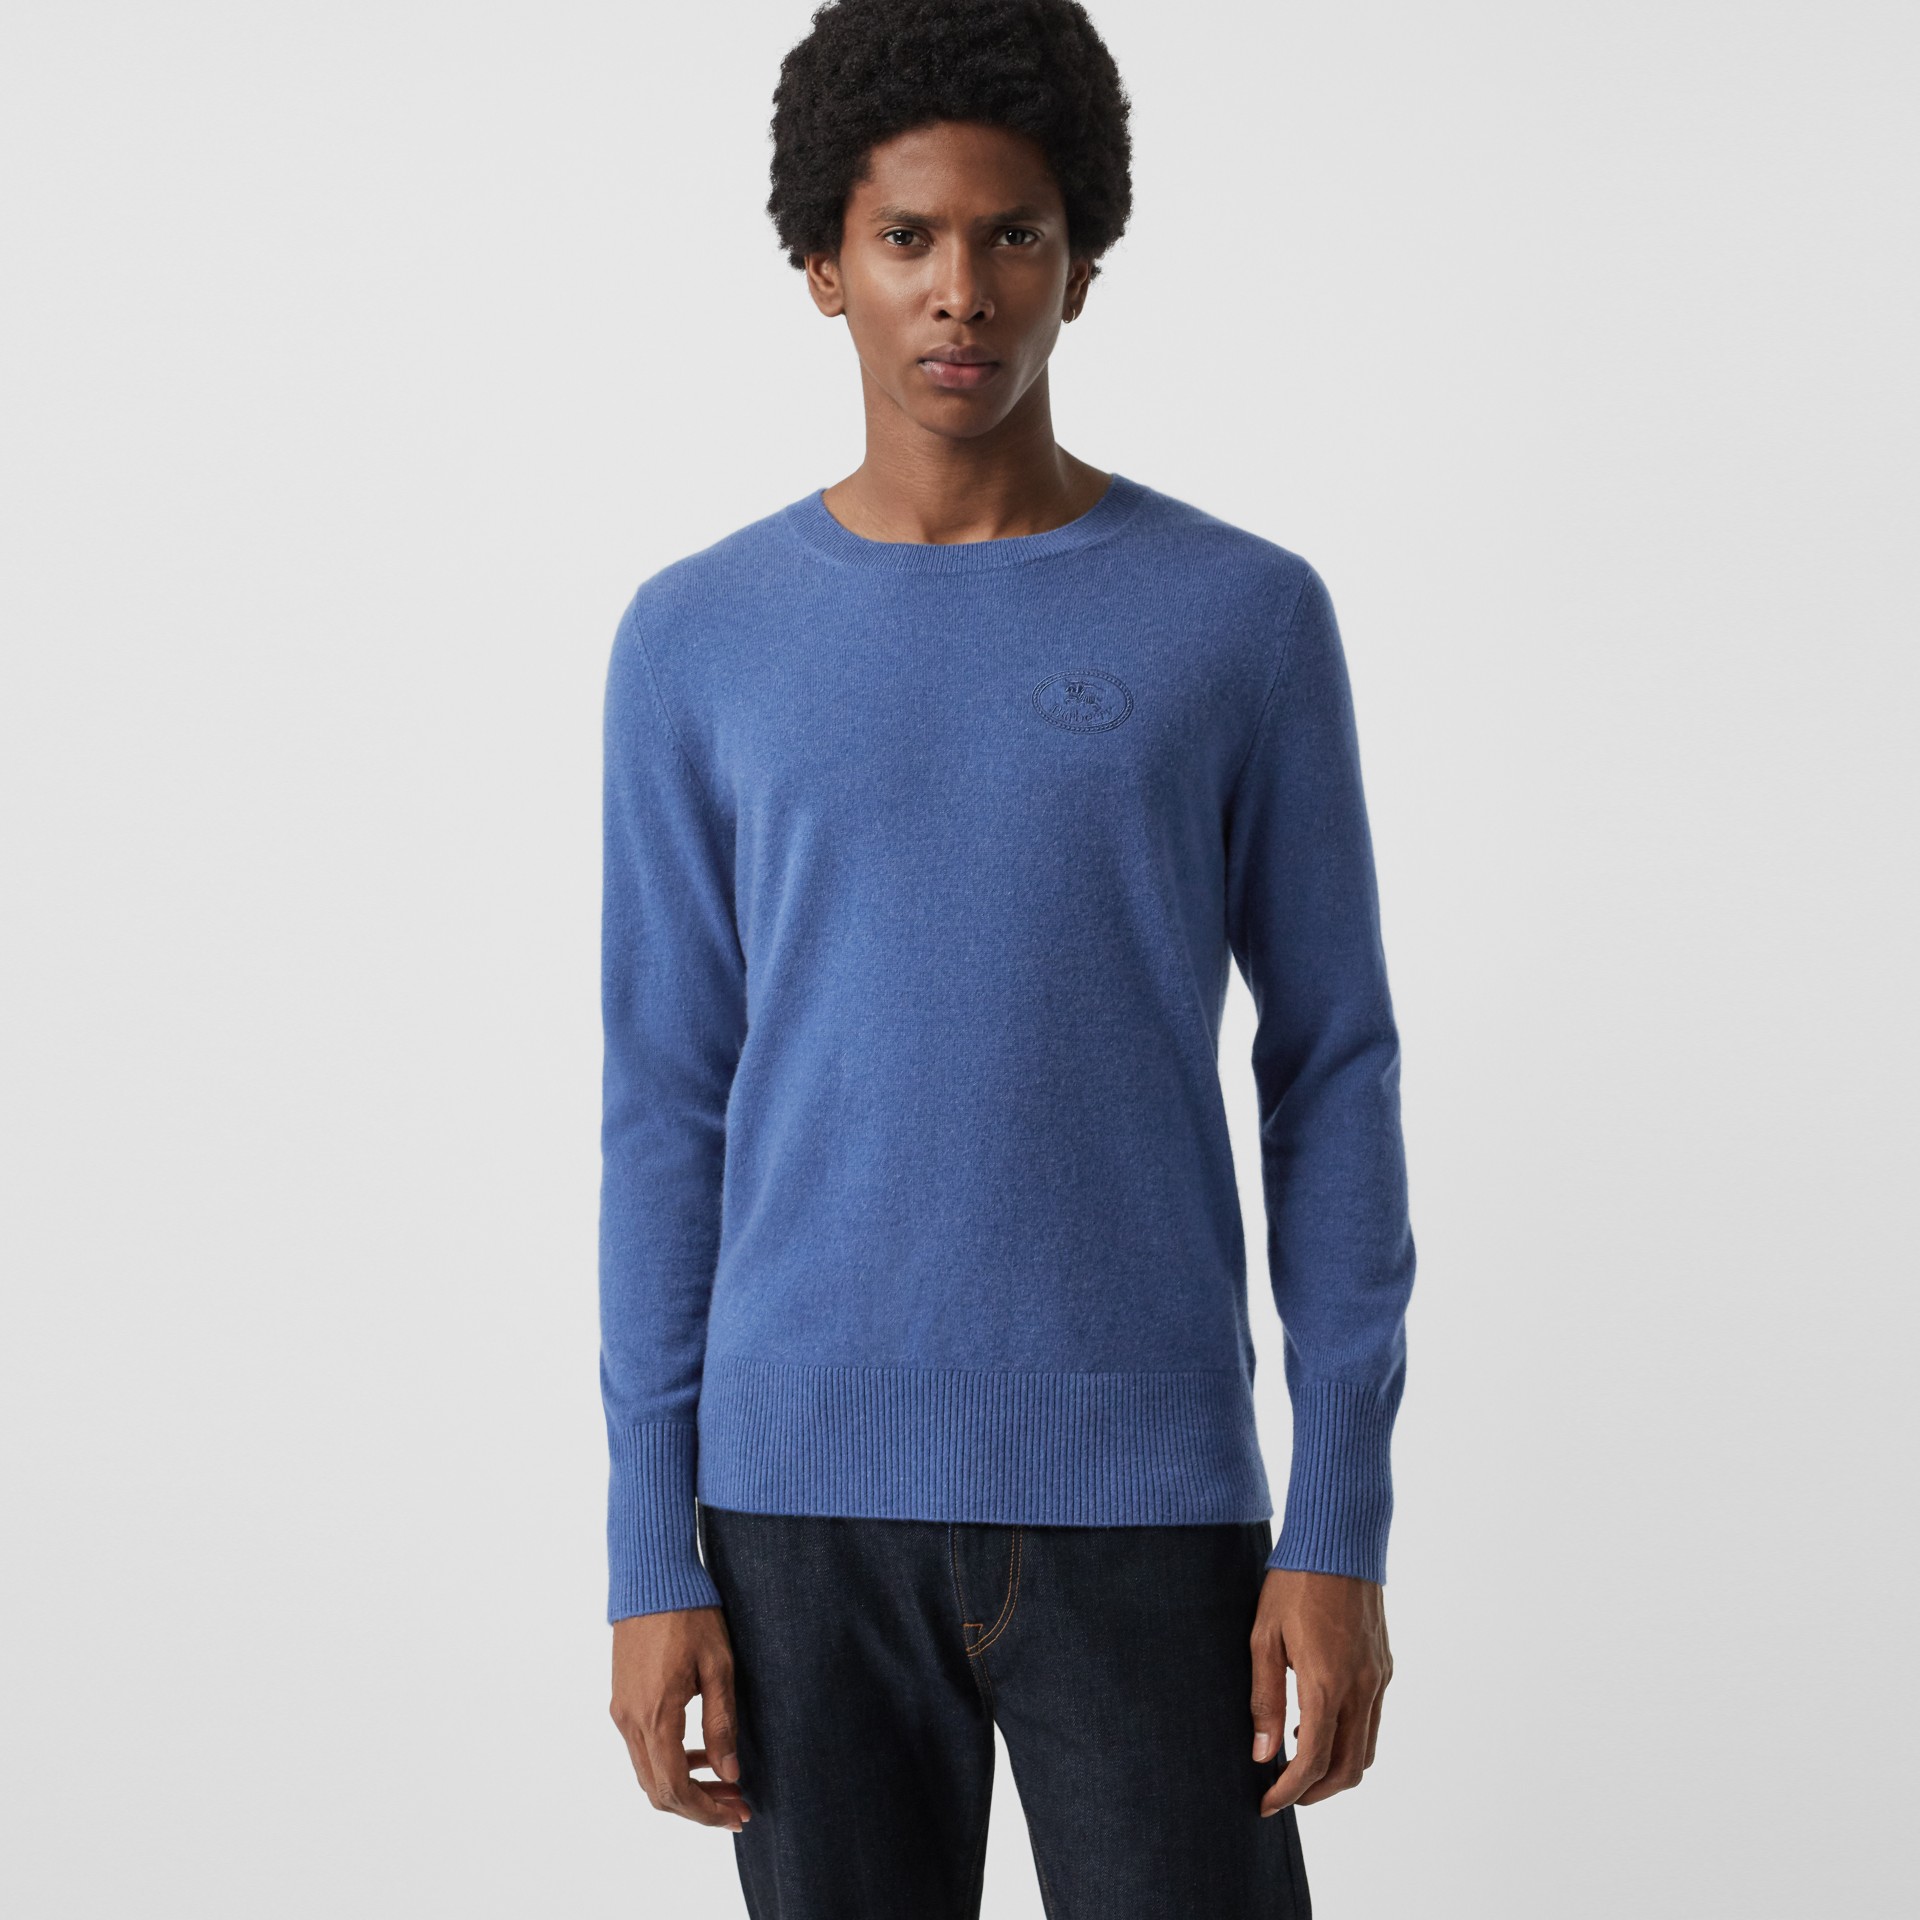 Embroidered Logo Cashmere Sweater in Dusty Blue - Men | Burberry Canada